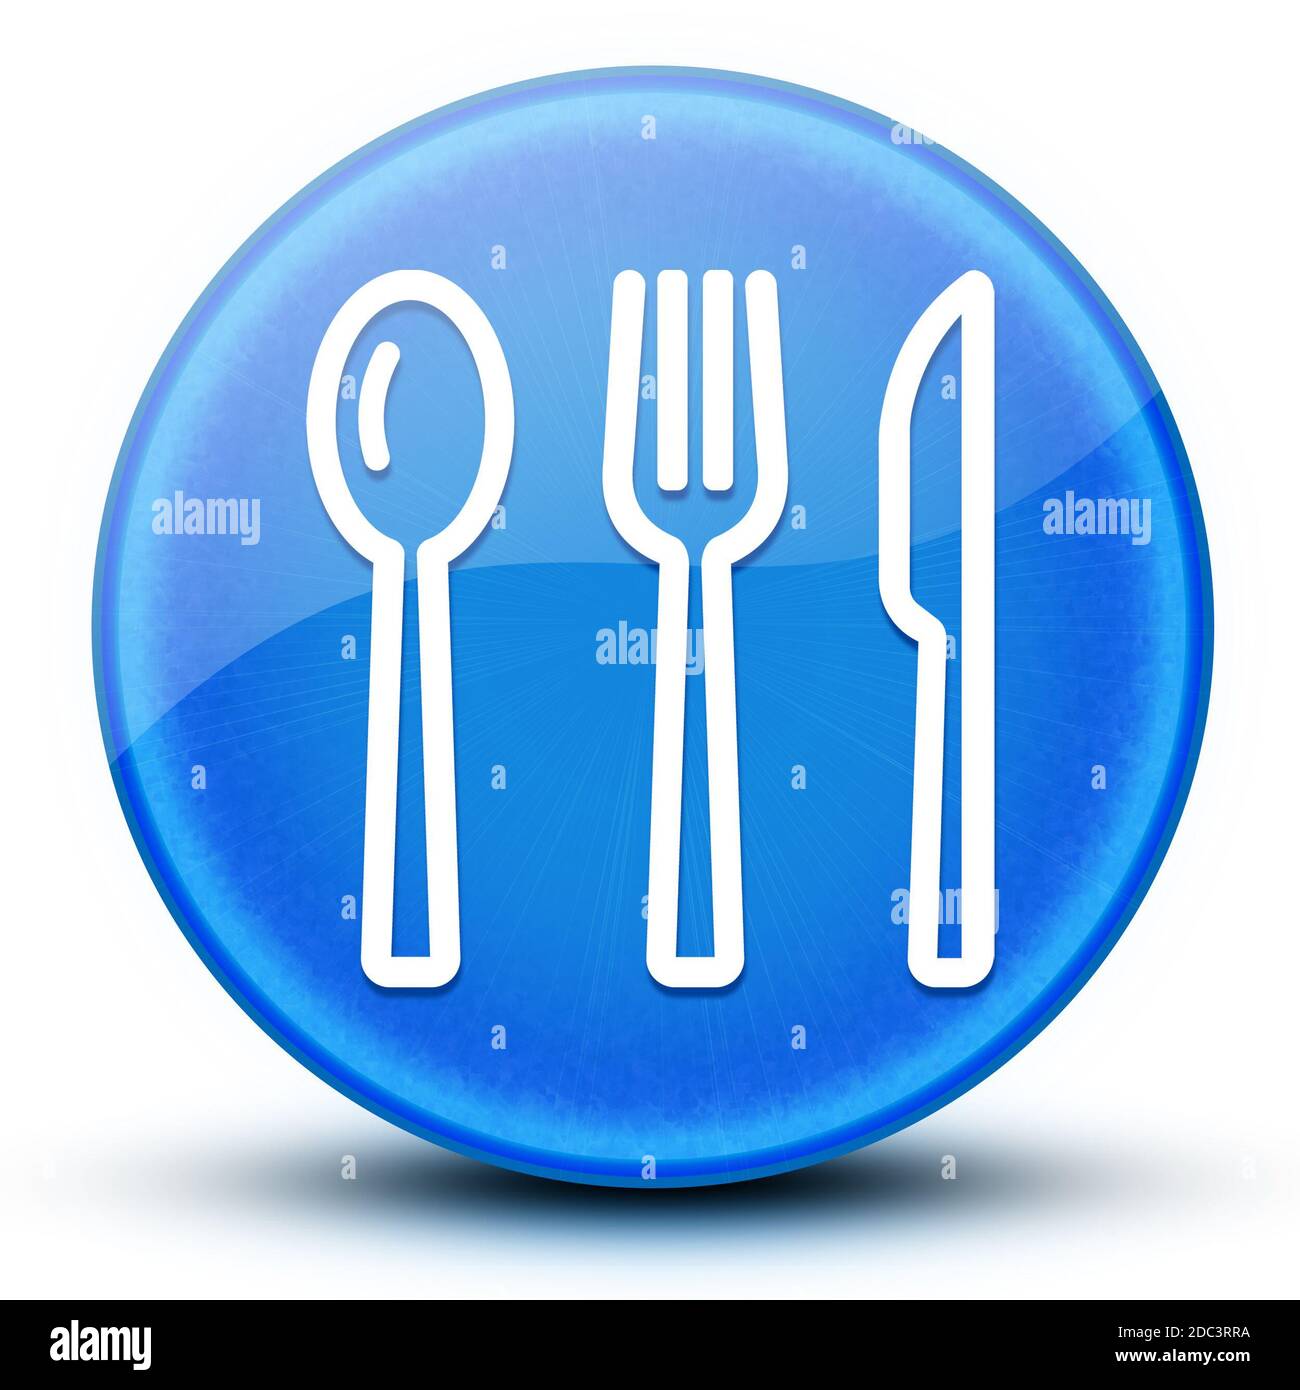 Cutlery eyeball glossy blue round button abstract illustration Stock Photo